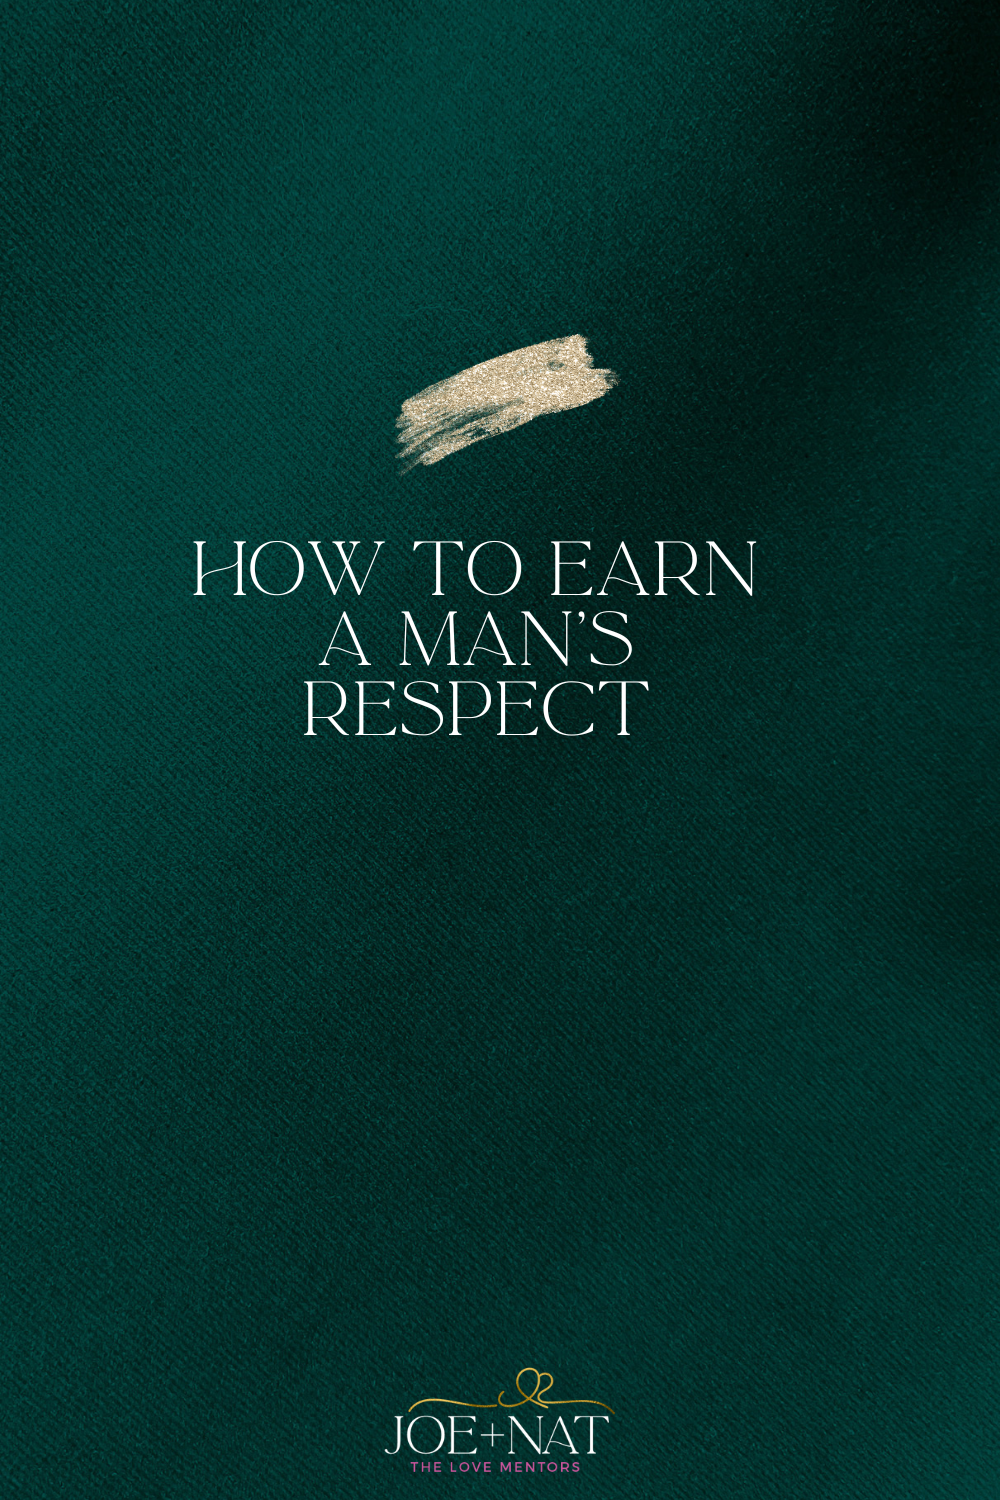 Featured image for “How to Earn a Man’s Respect”